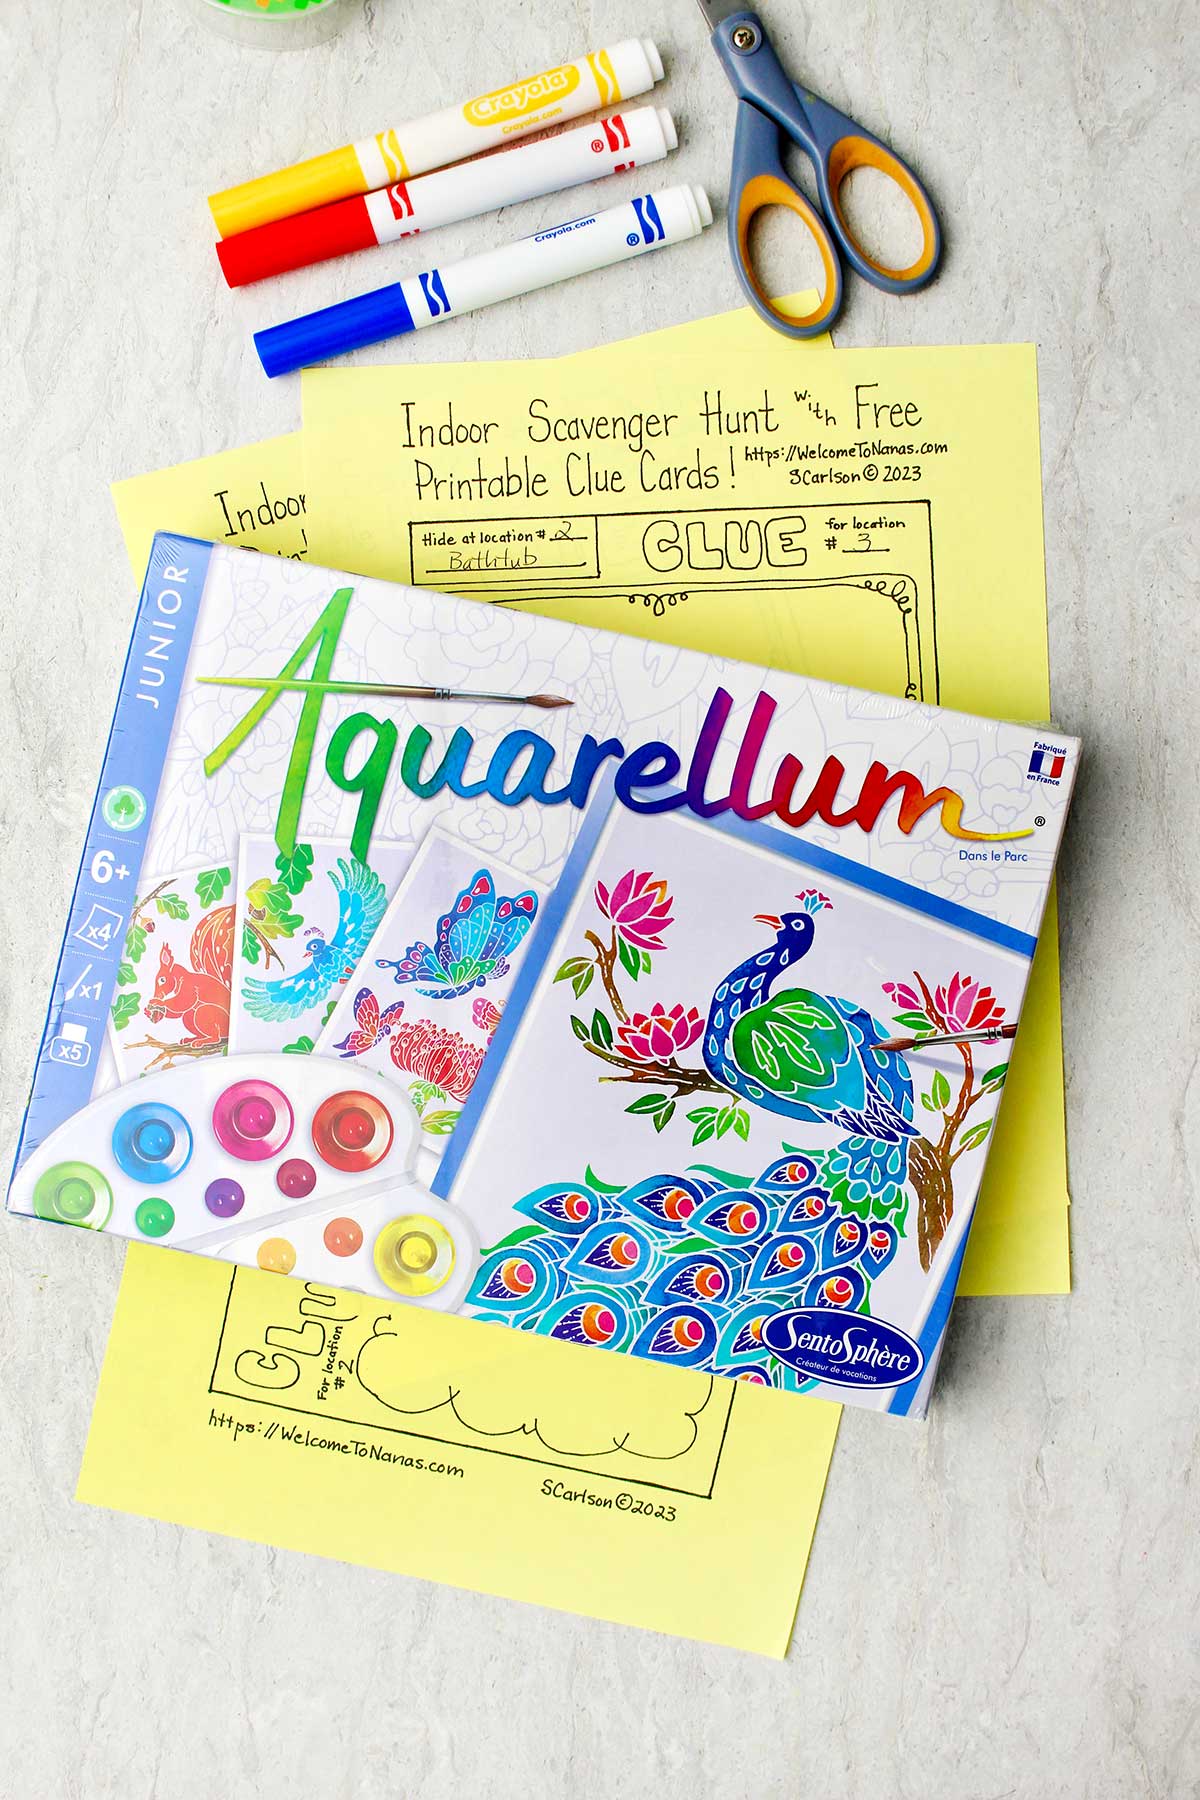 Aquarellum craft kit resting on stacks of clue card papers and markers and scissors near by.